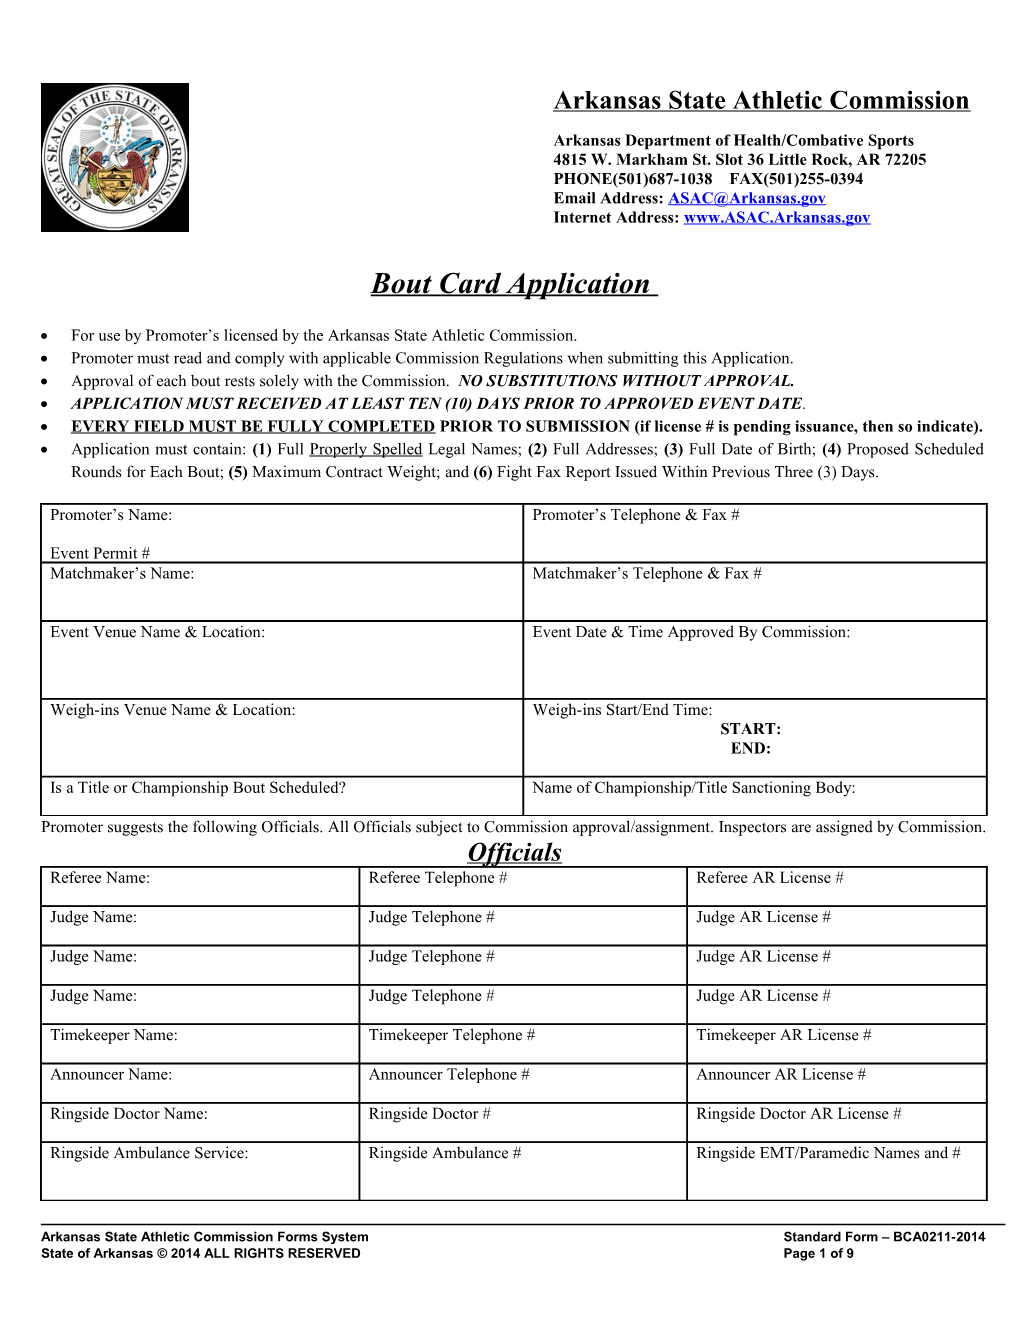 Arkansas State Athletic Commission Forms Systemstandard Form BCA0211-2014